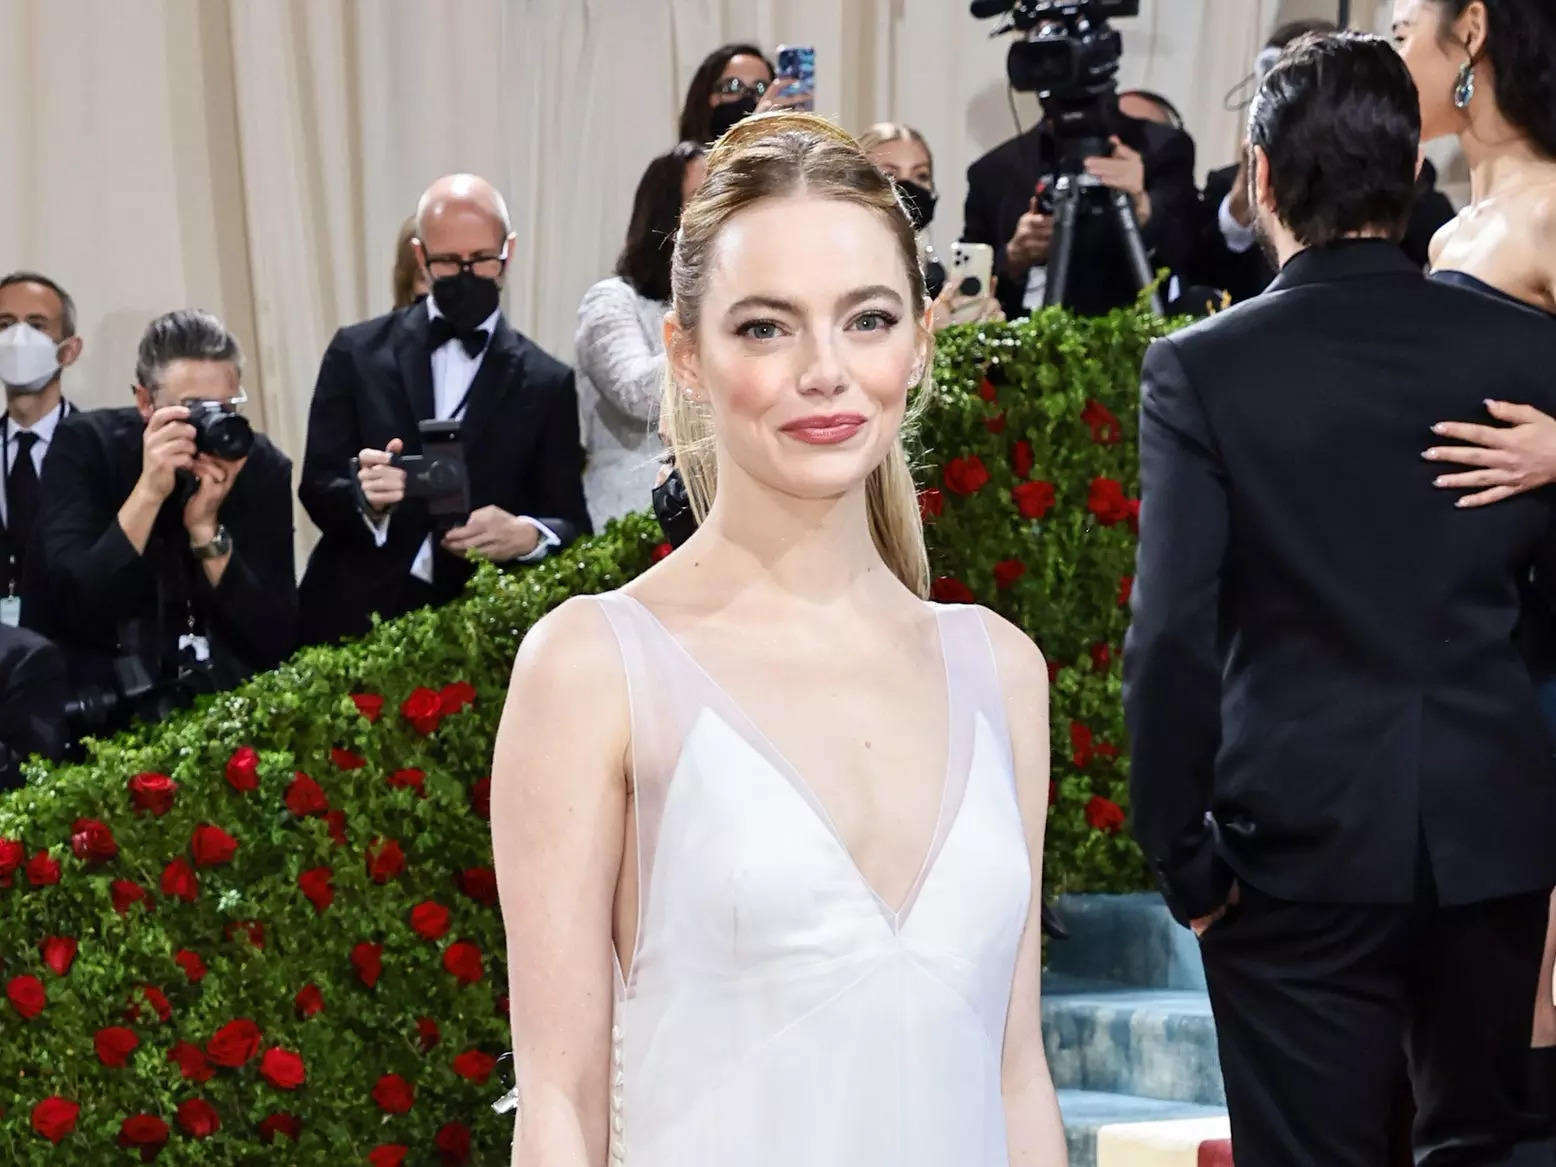 Emma Stone rewore one of her wedding dresses to the Met Gala red